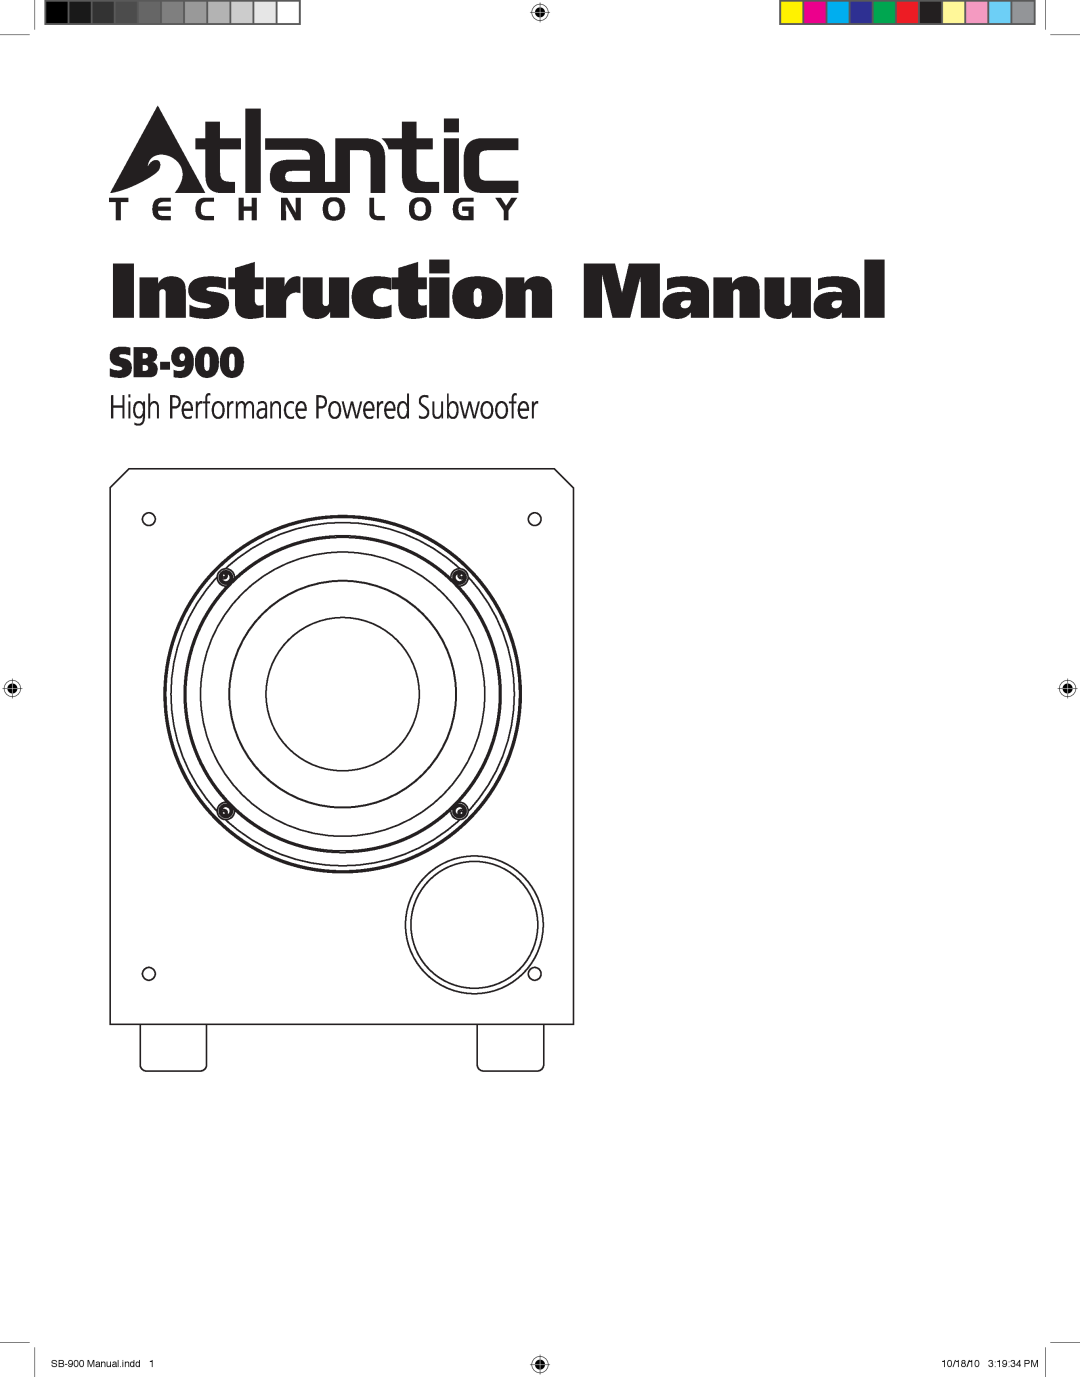 Atlantic Technology instruction manual High Performance Powered Subwoofer, SB-900Manual.indd, 10/18/10 3 19 34 PM 